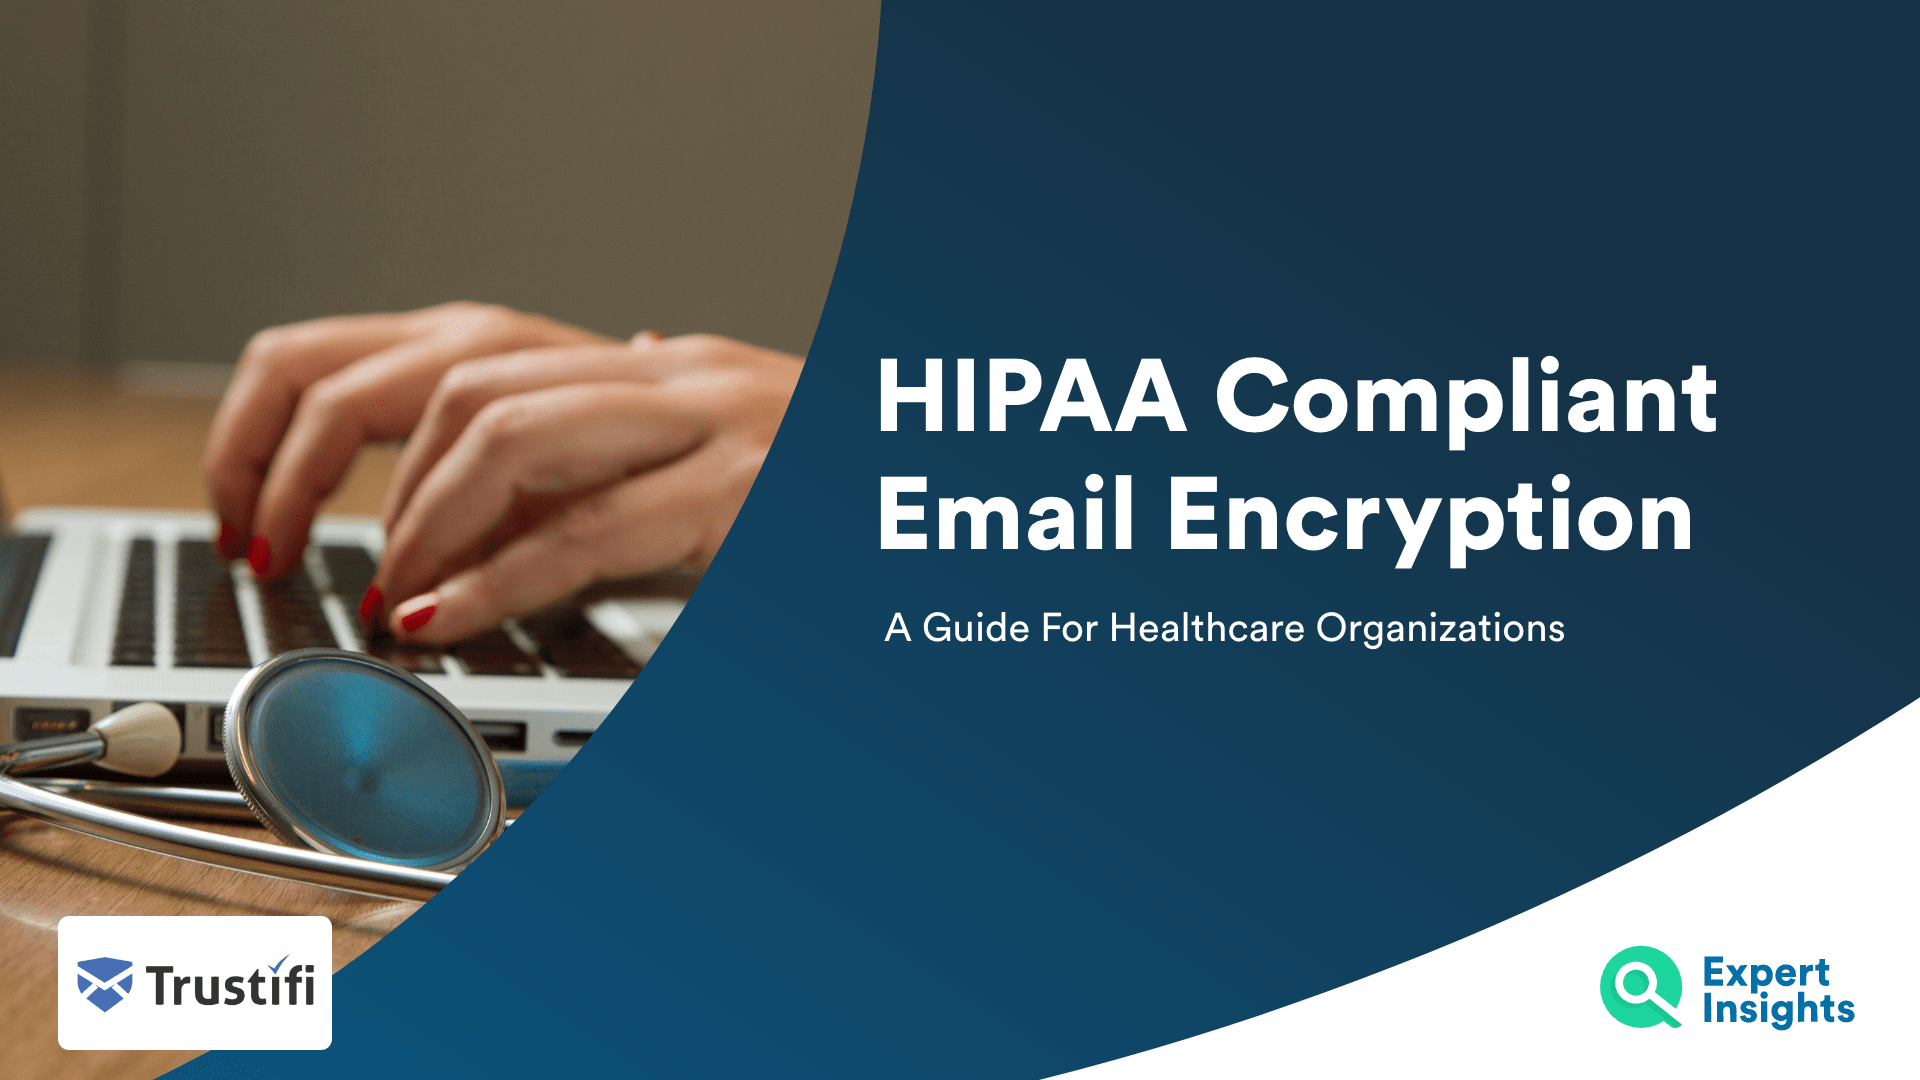 HIPAA Compliant Email Encryption: A Guide For Healthcare Organizations - Expert Insights